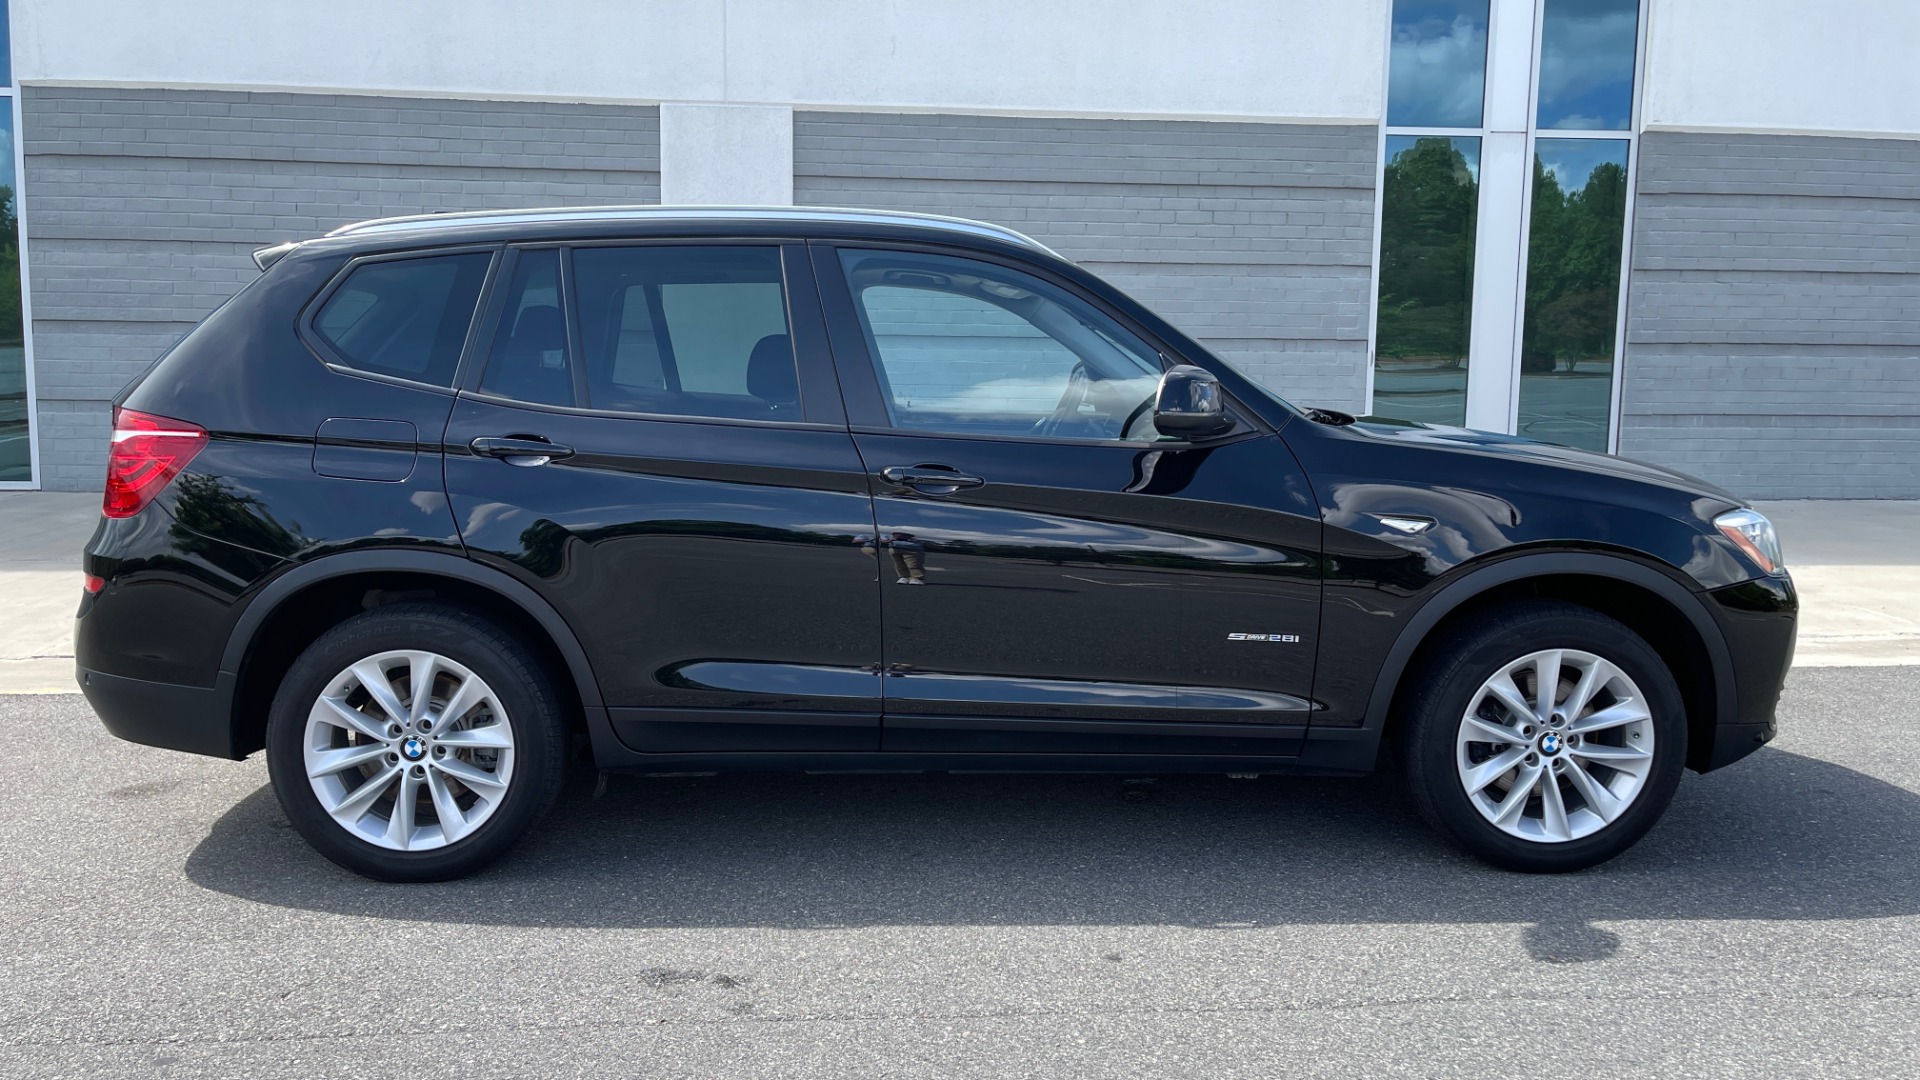 Used 2017 BMW X3 SDRIVE28I / DRVR ASST PKG / HTD STS / REARVIEW / 18IN WHEELS for sale Sold at Formula Imports in Charlotte NC 28227 4